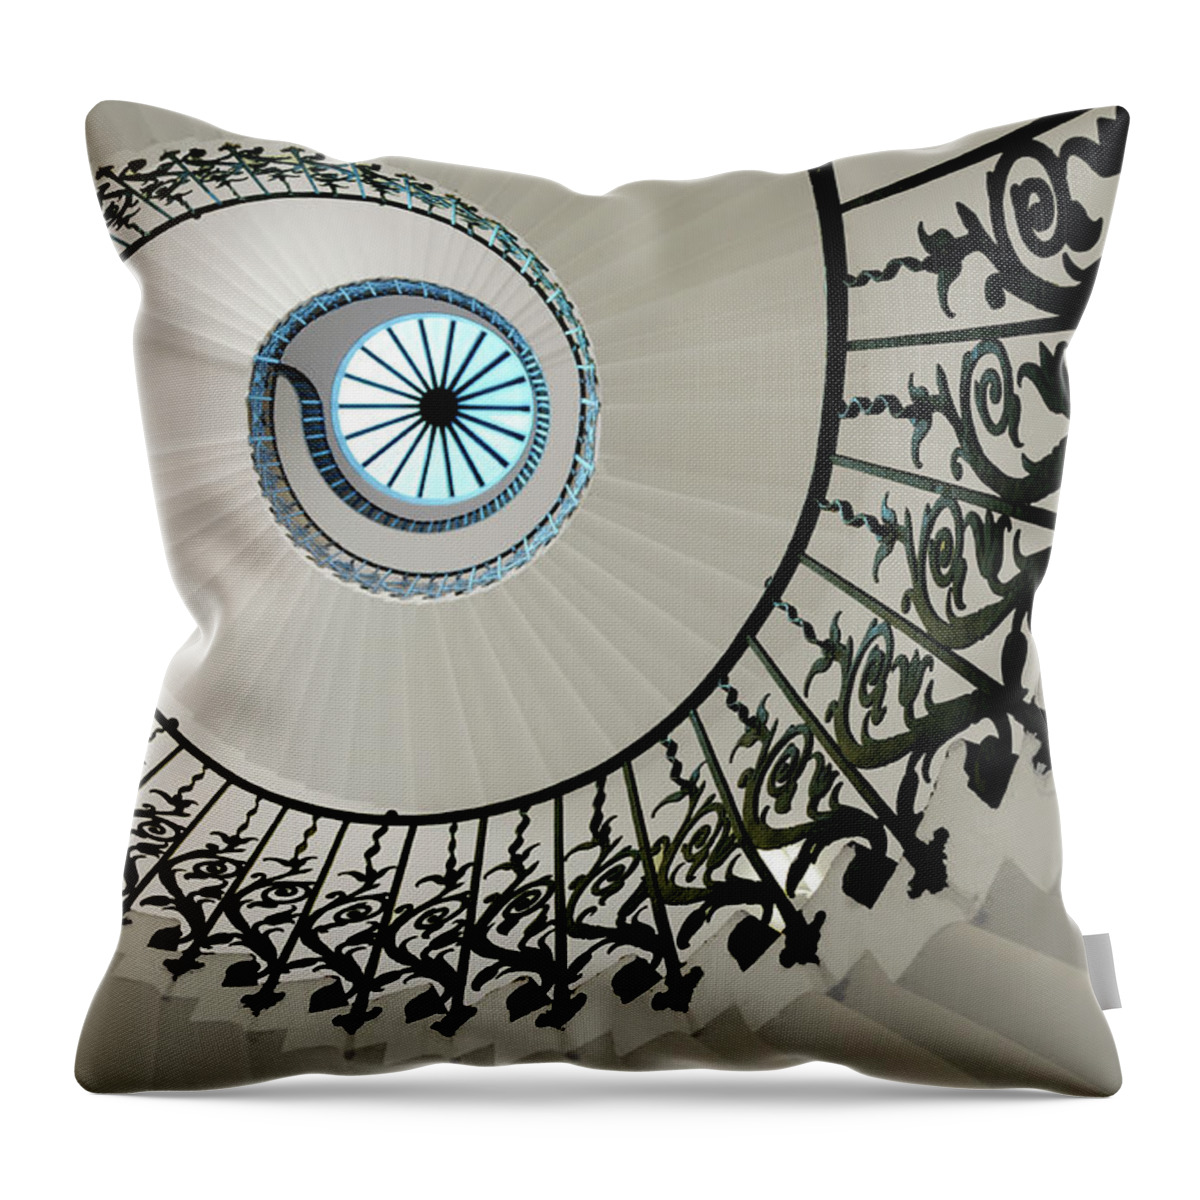 Queen's House Throw Pillow featuring the photograph Tulip Stairs by Anna Gett Photography